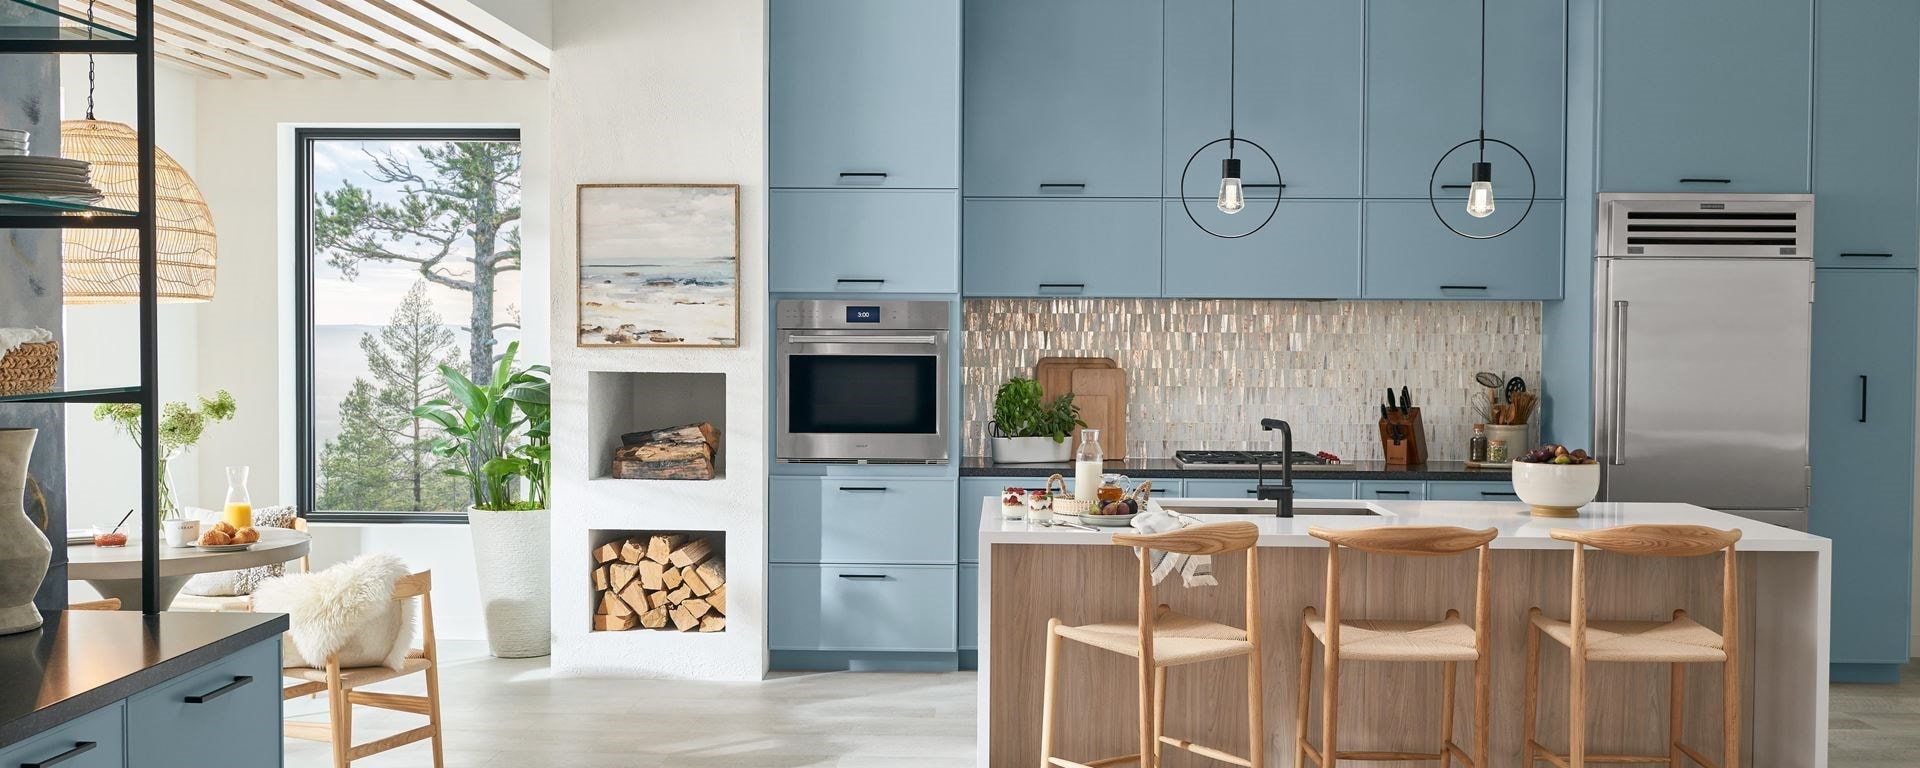 Custom Kitchen Design featuring Sub-Zero, Wolf, and Cove kitchen appliances set in modern slim shaker, denim and Swiss cabinetry